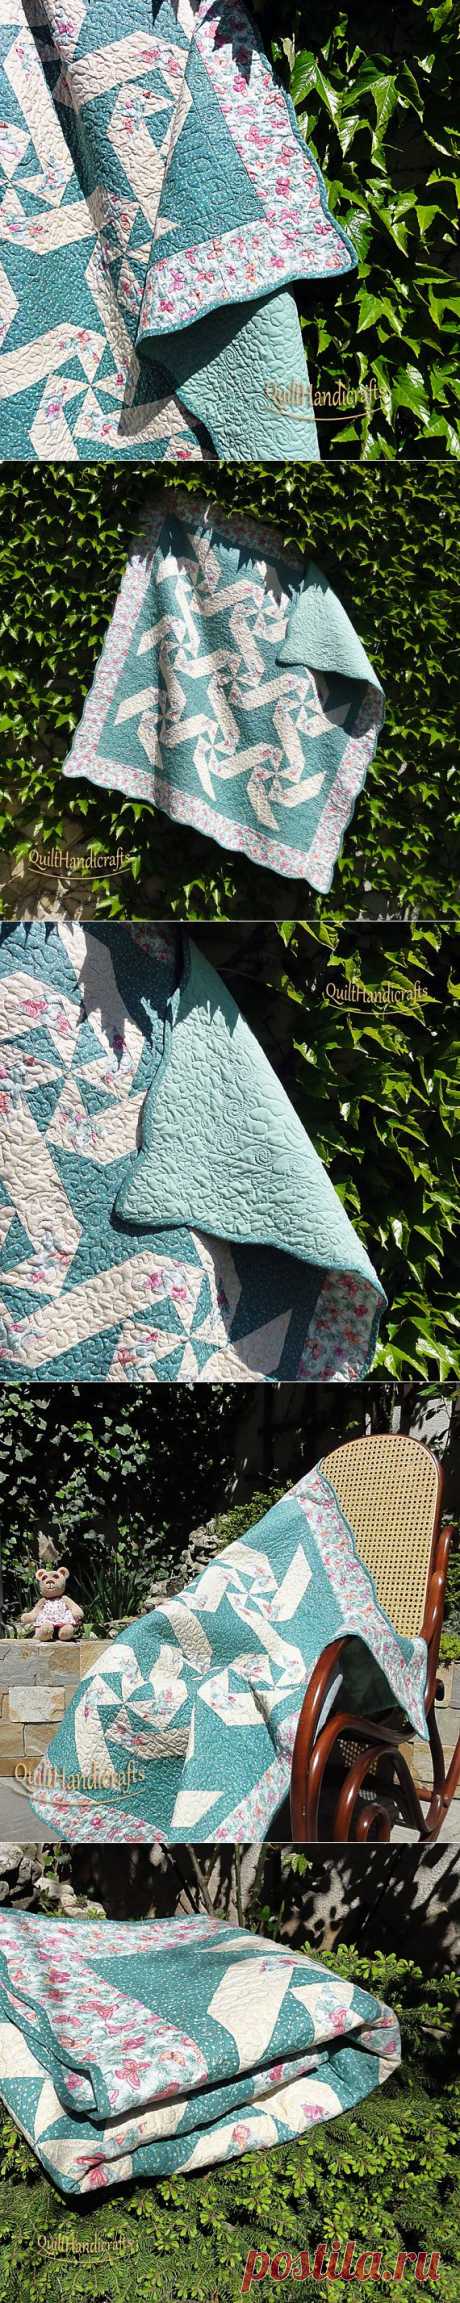 Quilted blanket baby Quilt is sewn in a by QuiltHandicrafts